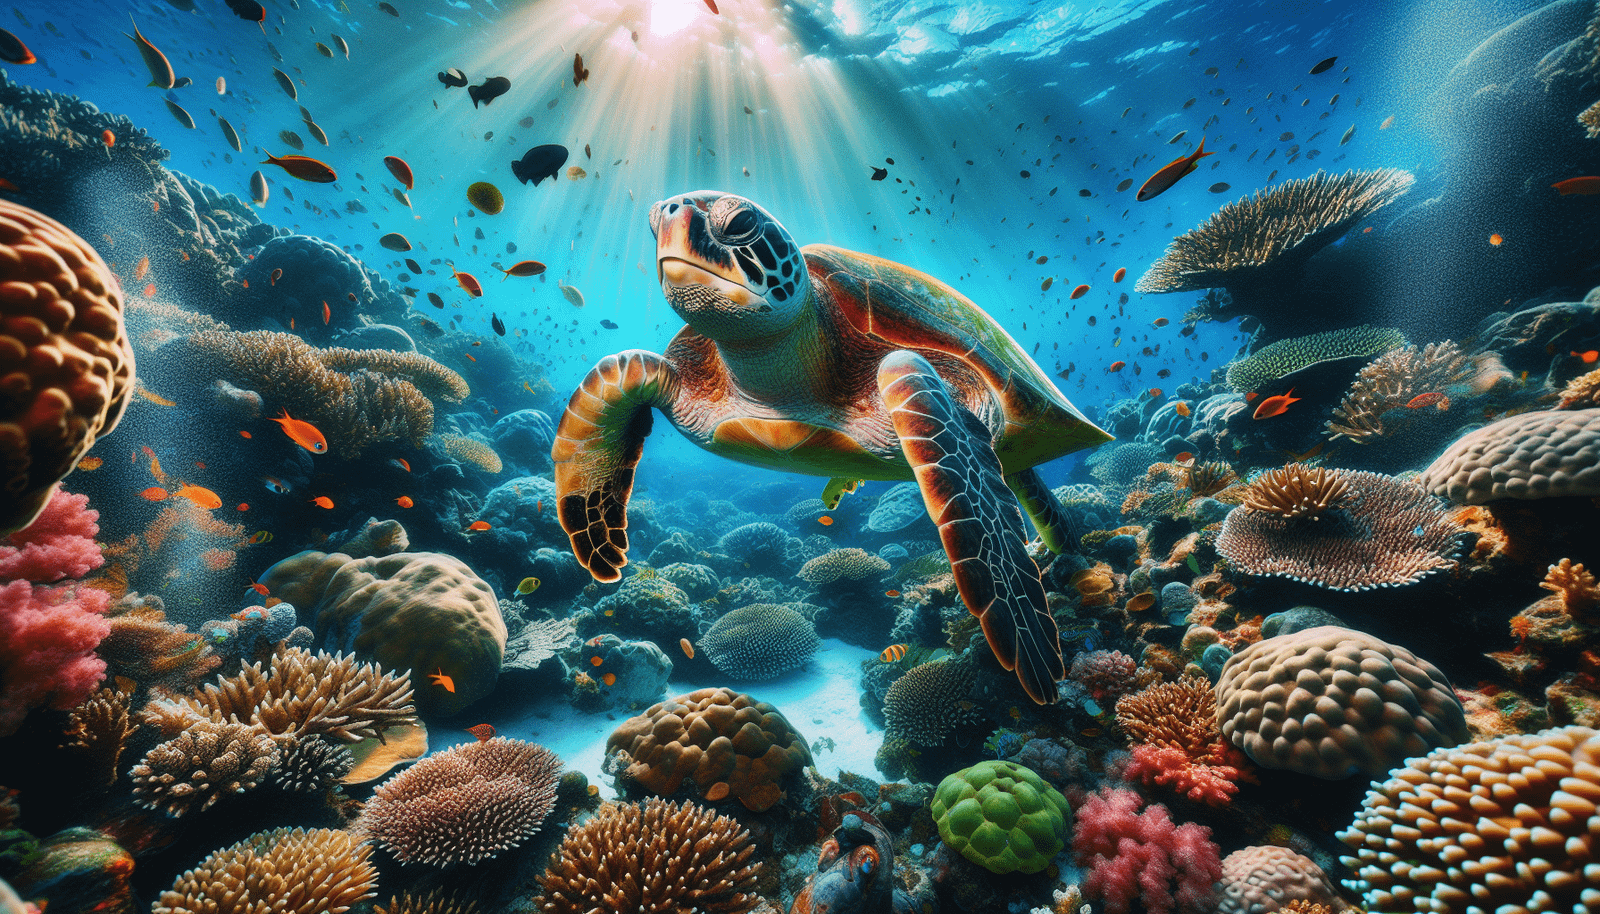 A sea turtle gracefully swimming through a coral reef ecosystem